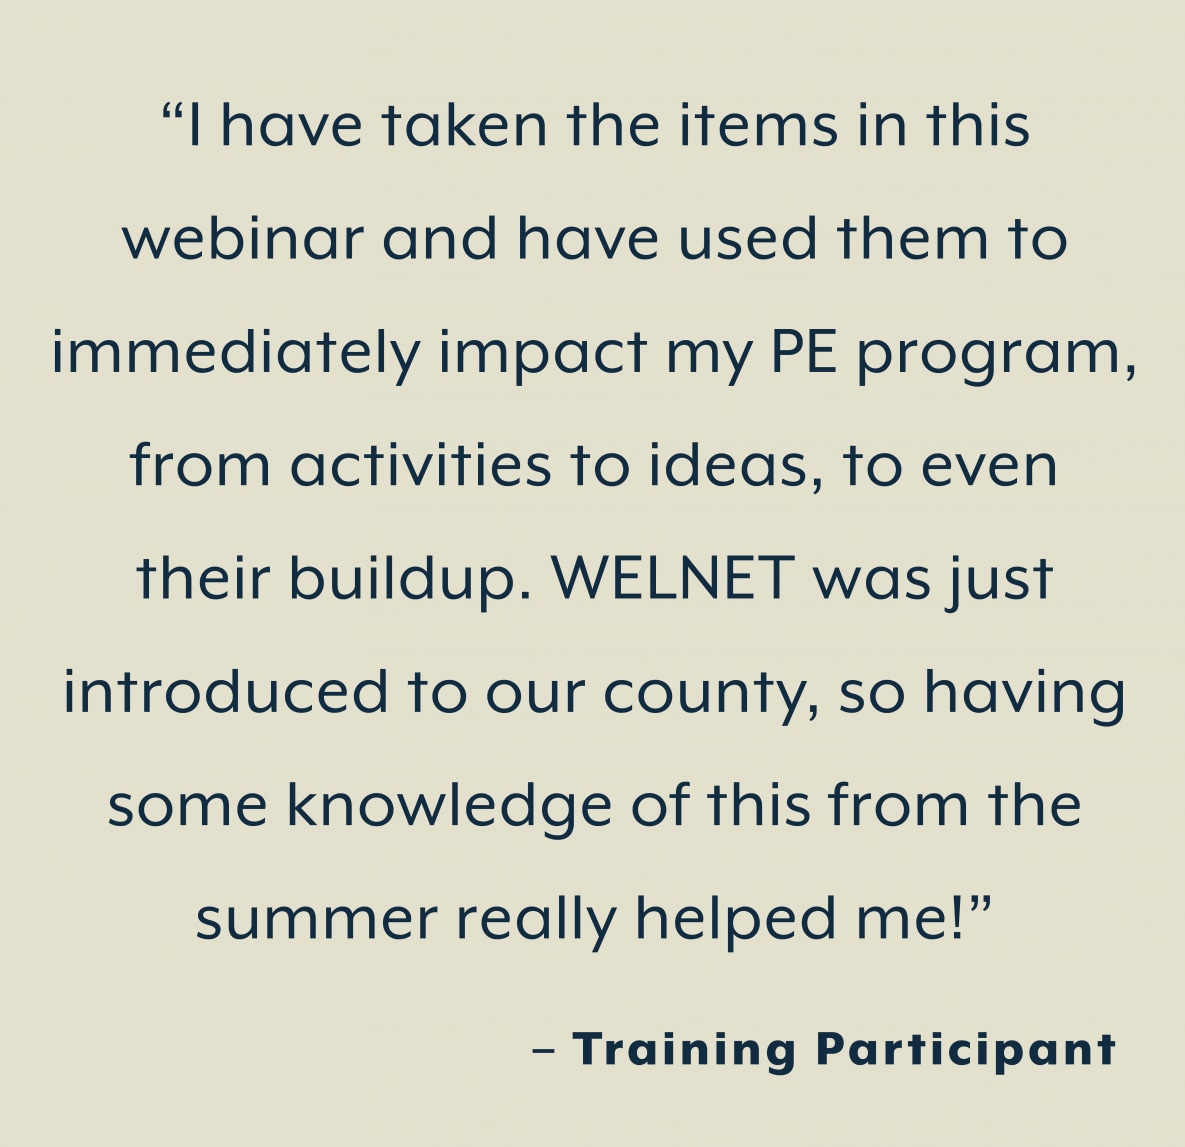 “I have taken the items in this  webinar and have used them to  immediately impact my PE program,  from activities to ideas, to even  their buildup. WELNET was just  introduced to our county, so having  some knowledge of this from the  summer really helped me!”  – Training Participant